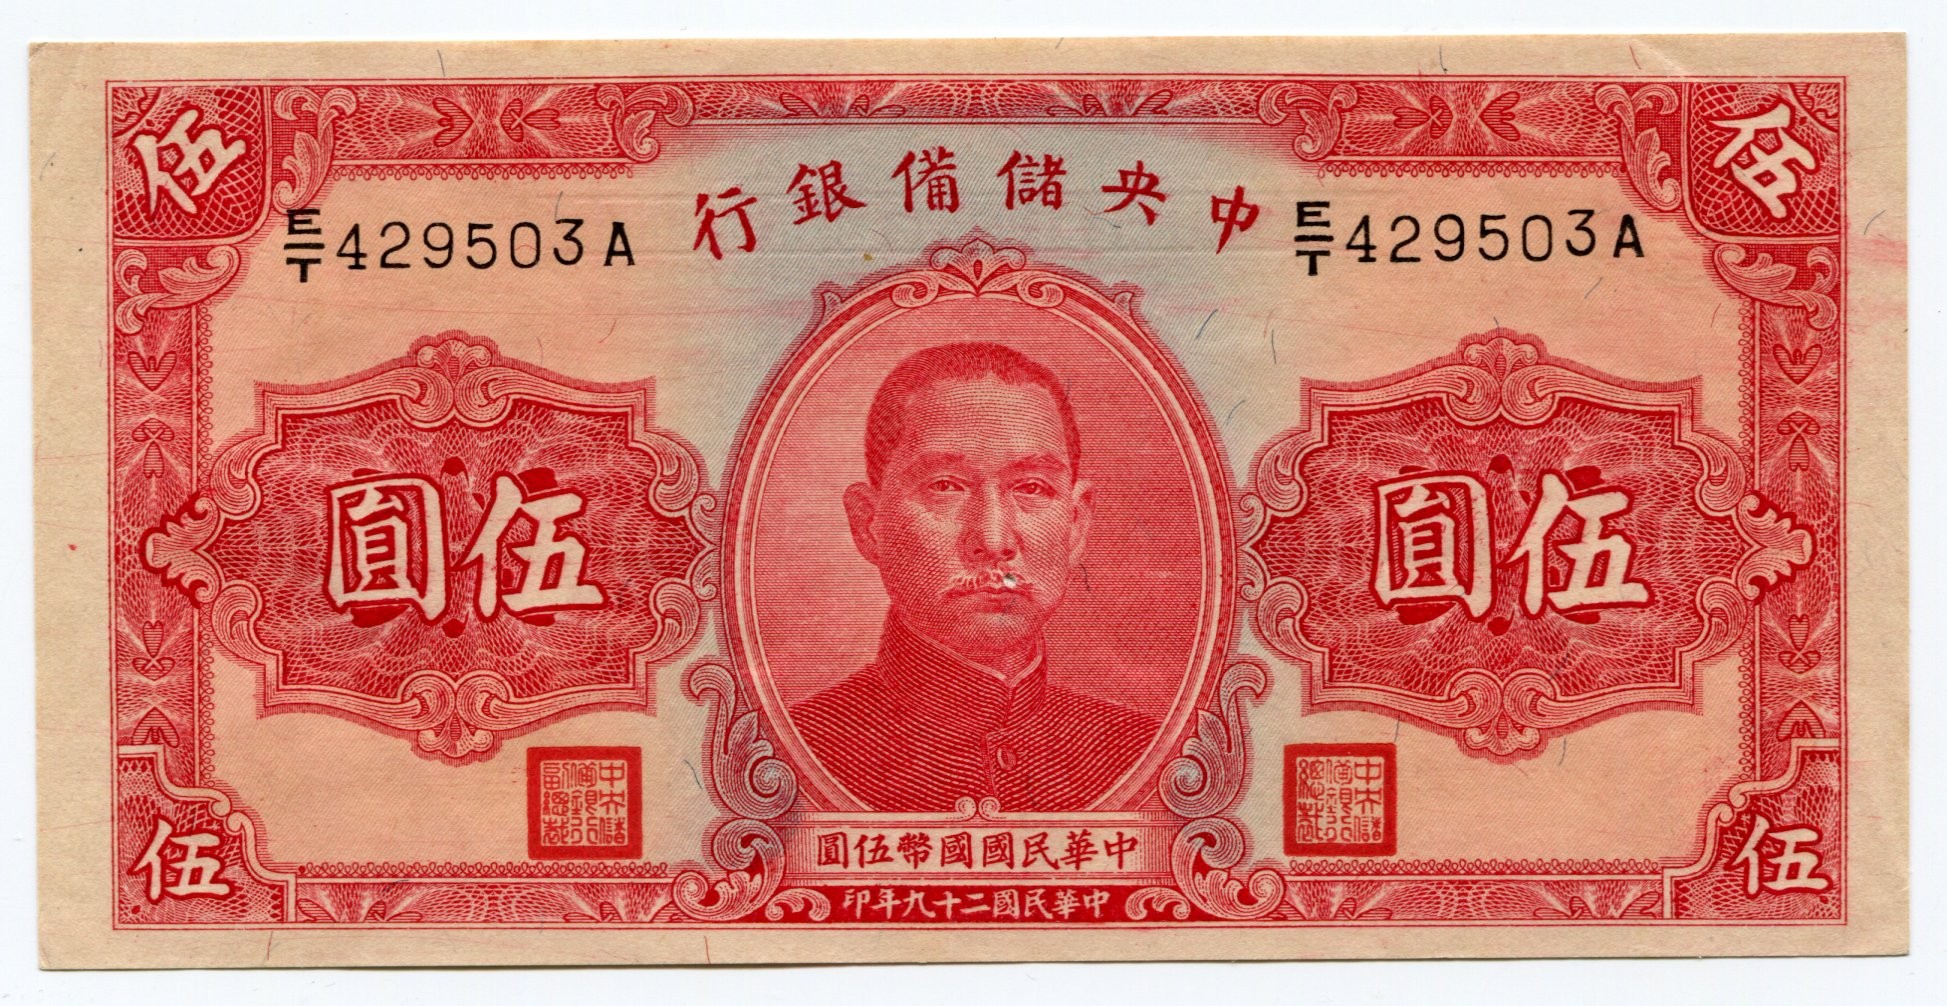 China Harbin Russo-Asiatic Bank 10 Roubles 1917 (ND) | Katz Auction